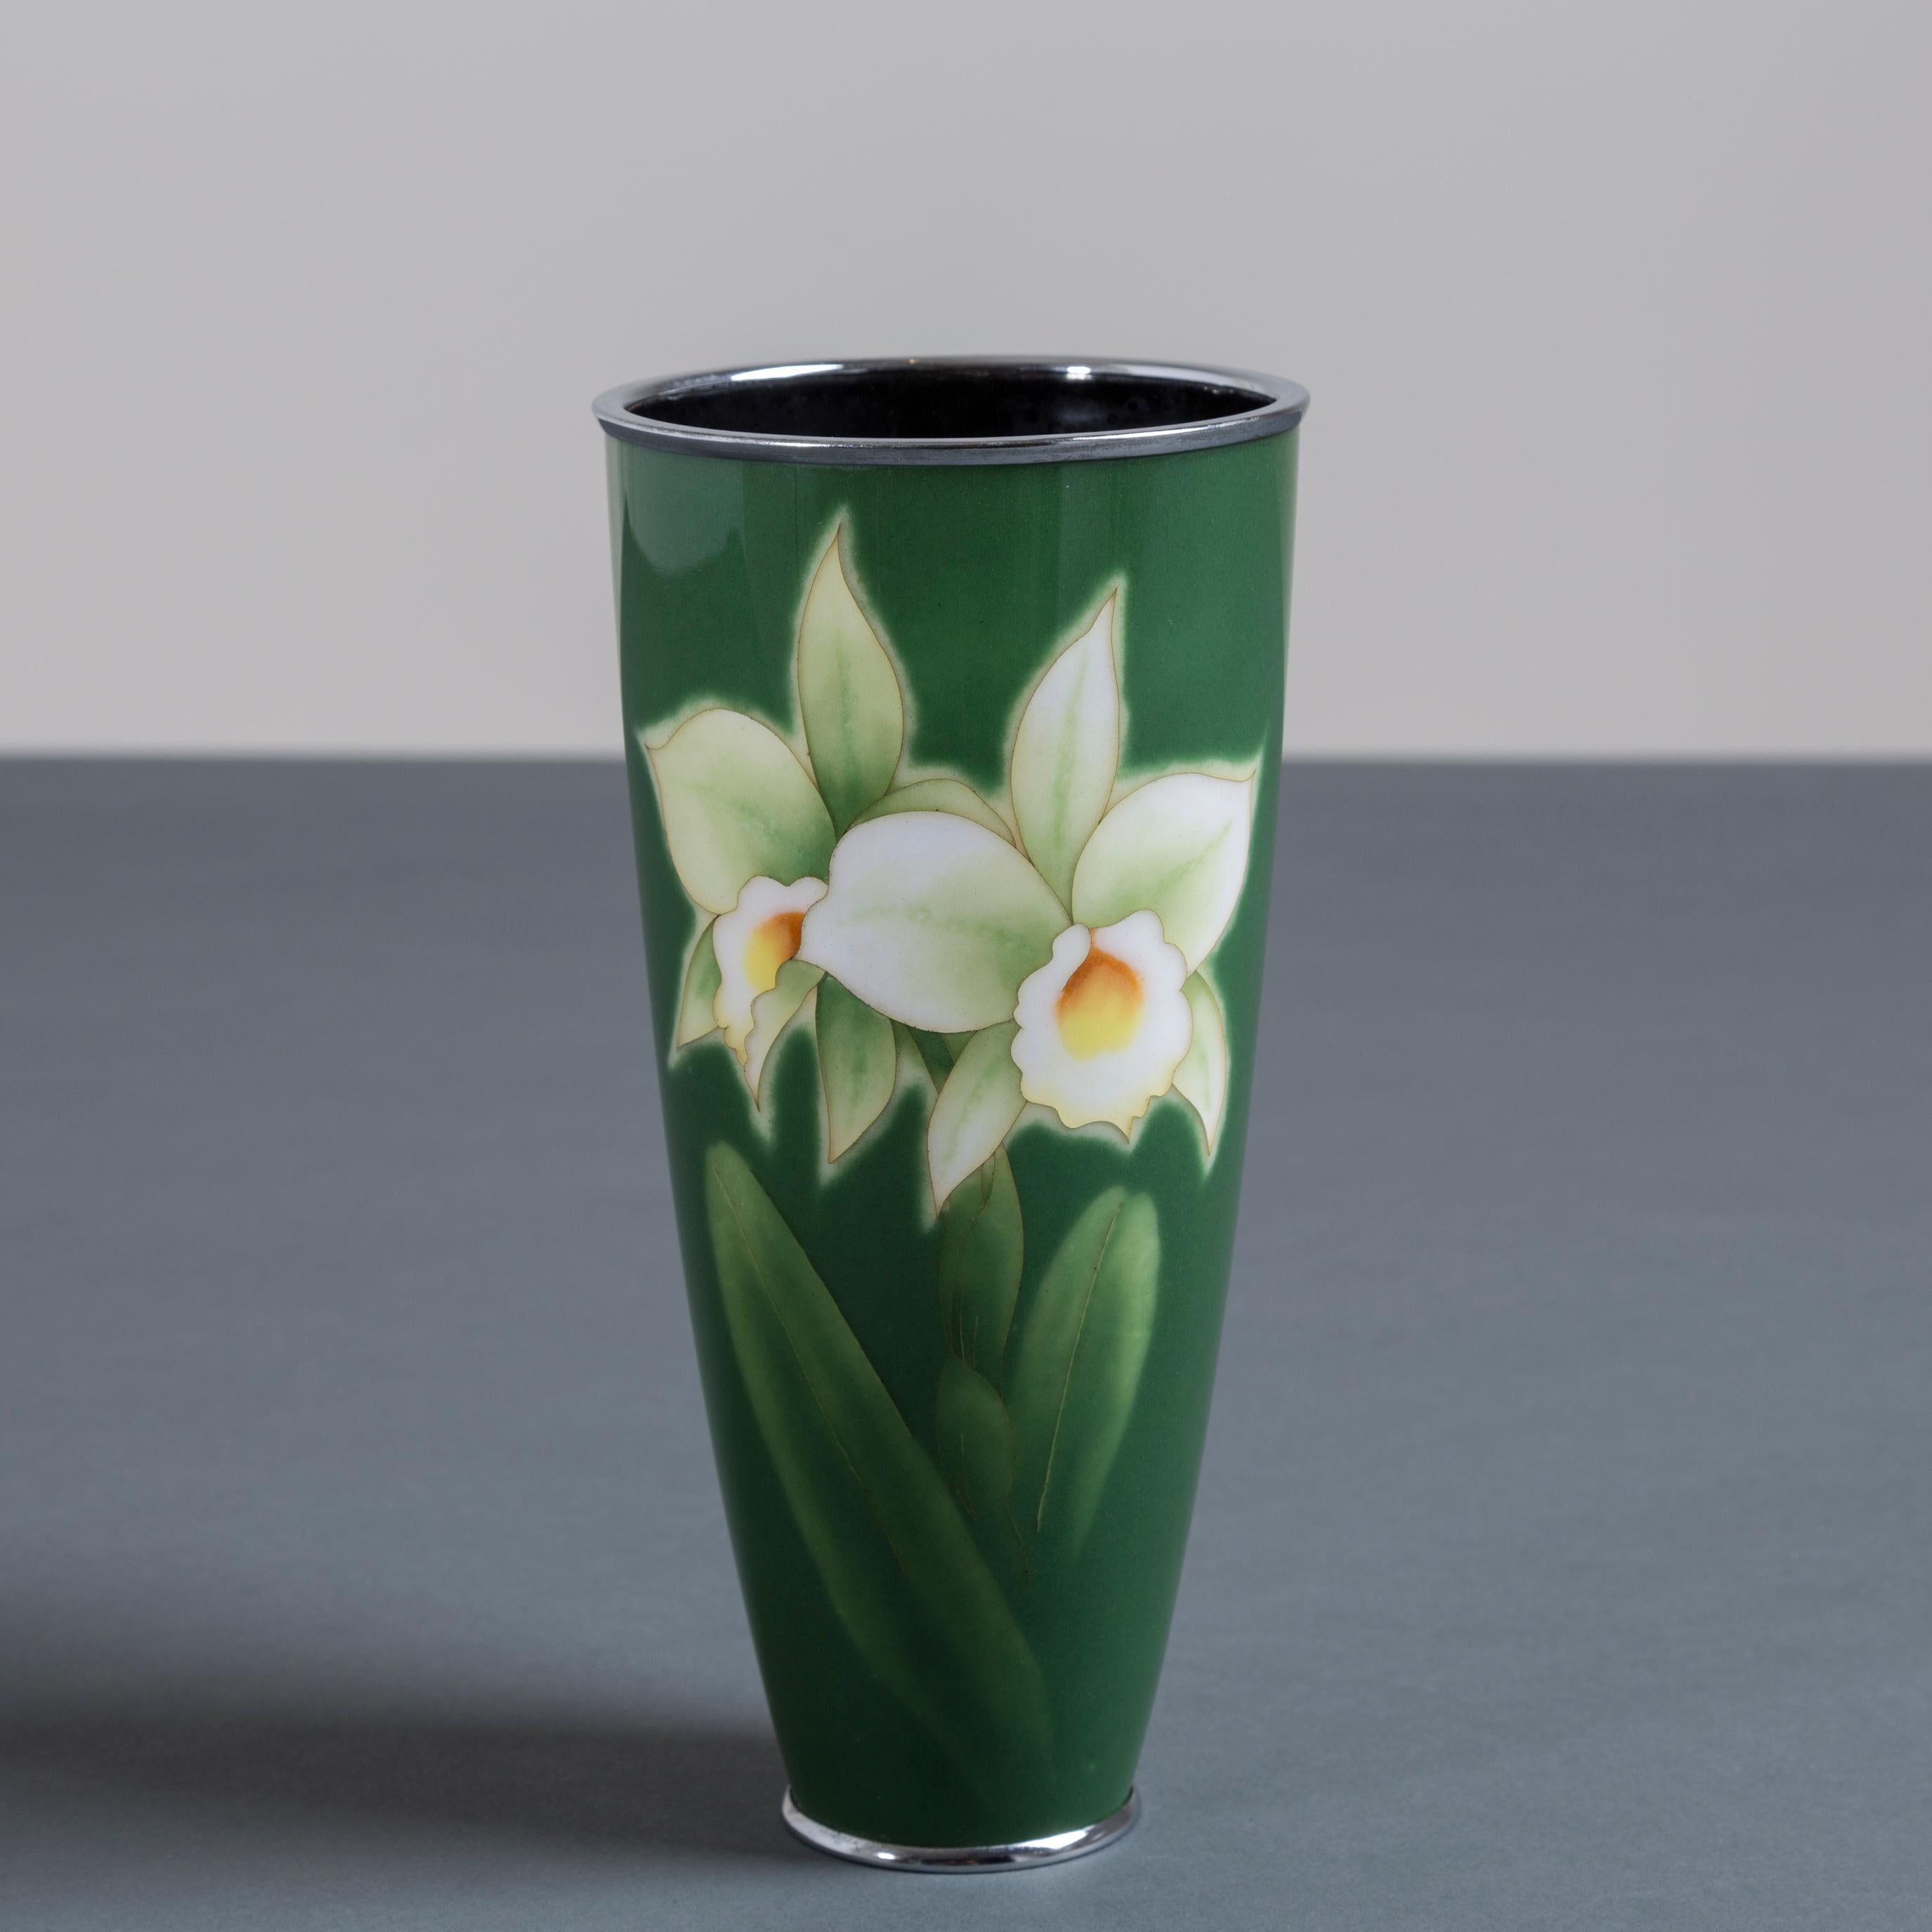 Mid-20th Century Japanese Cloisonné Enamel Vase by Ando, circa 1960 For Sale